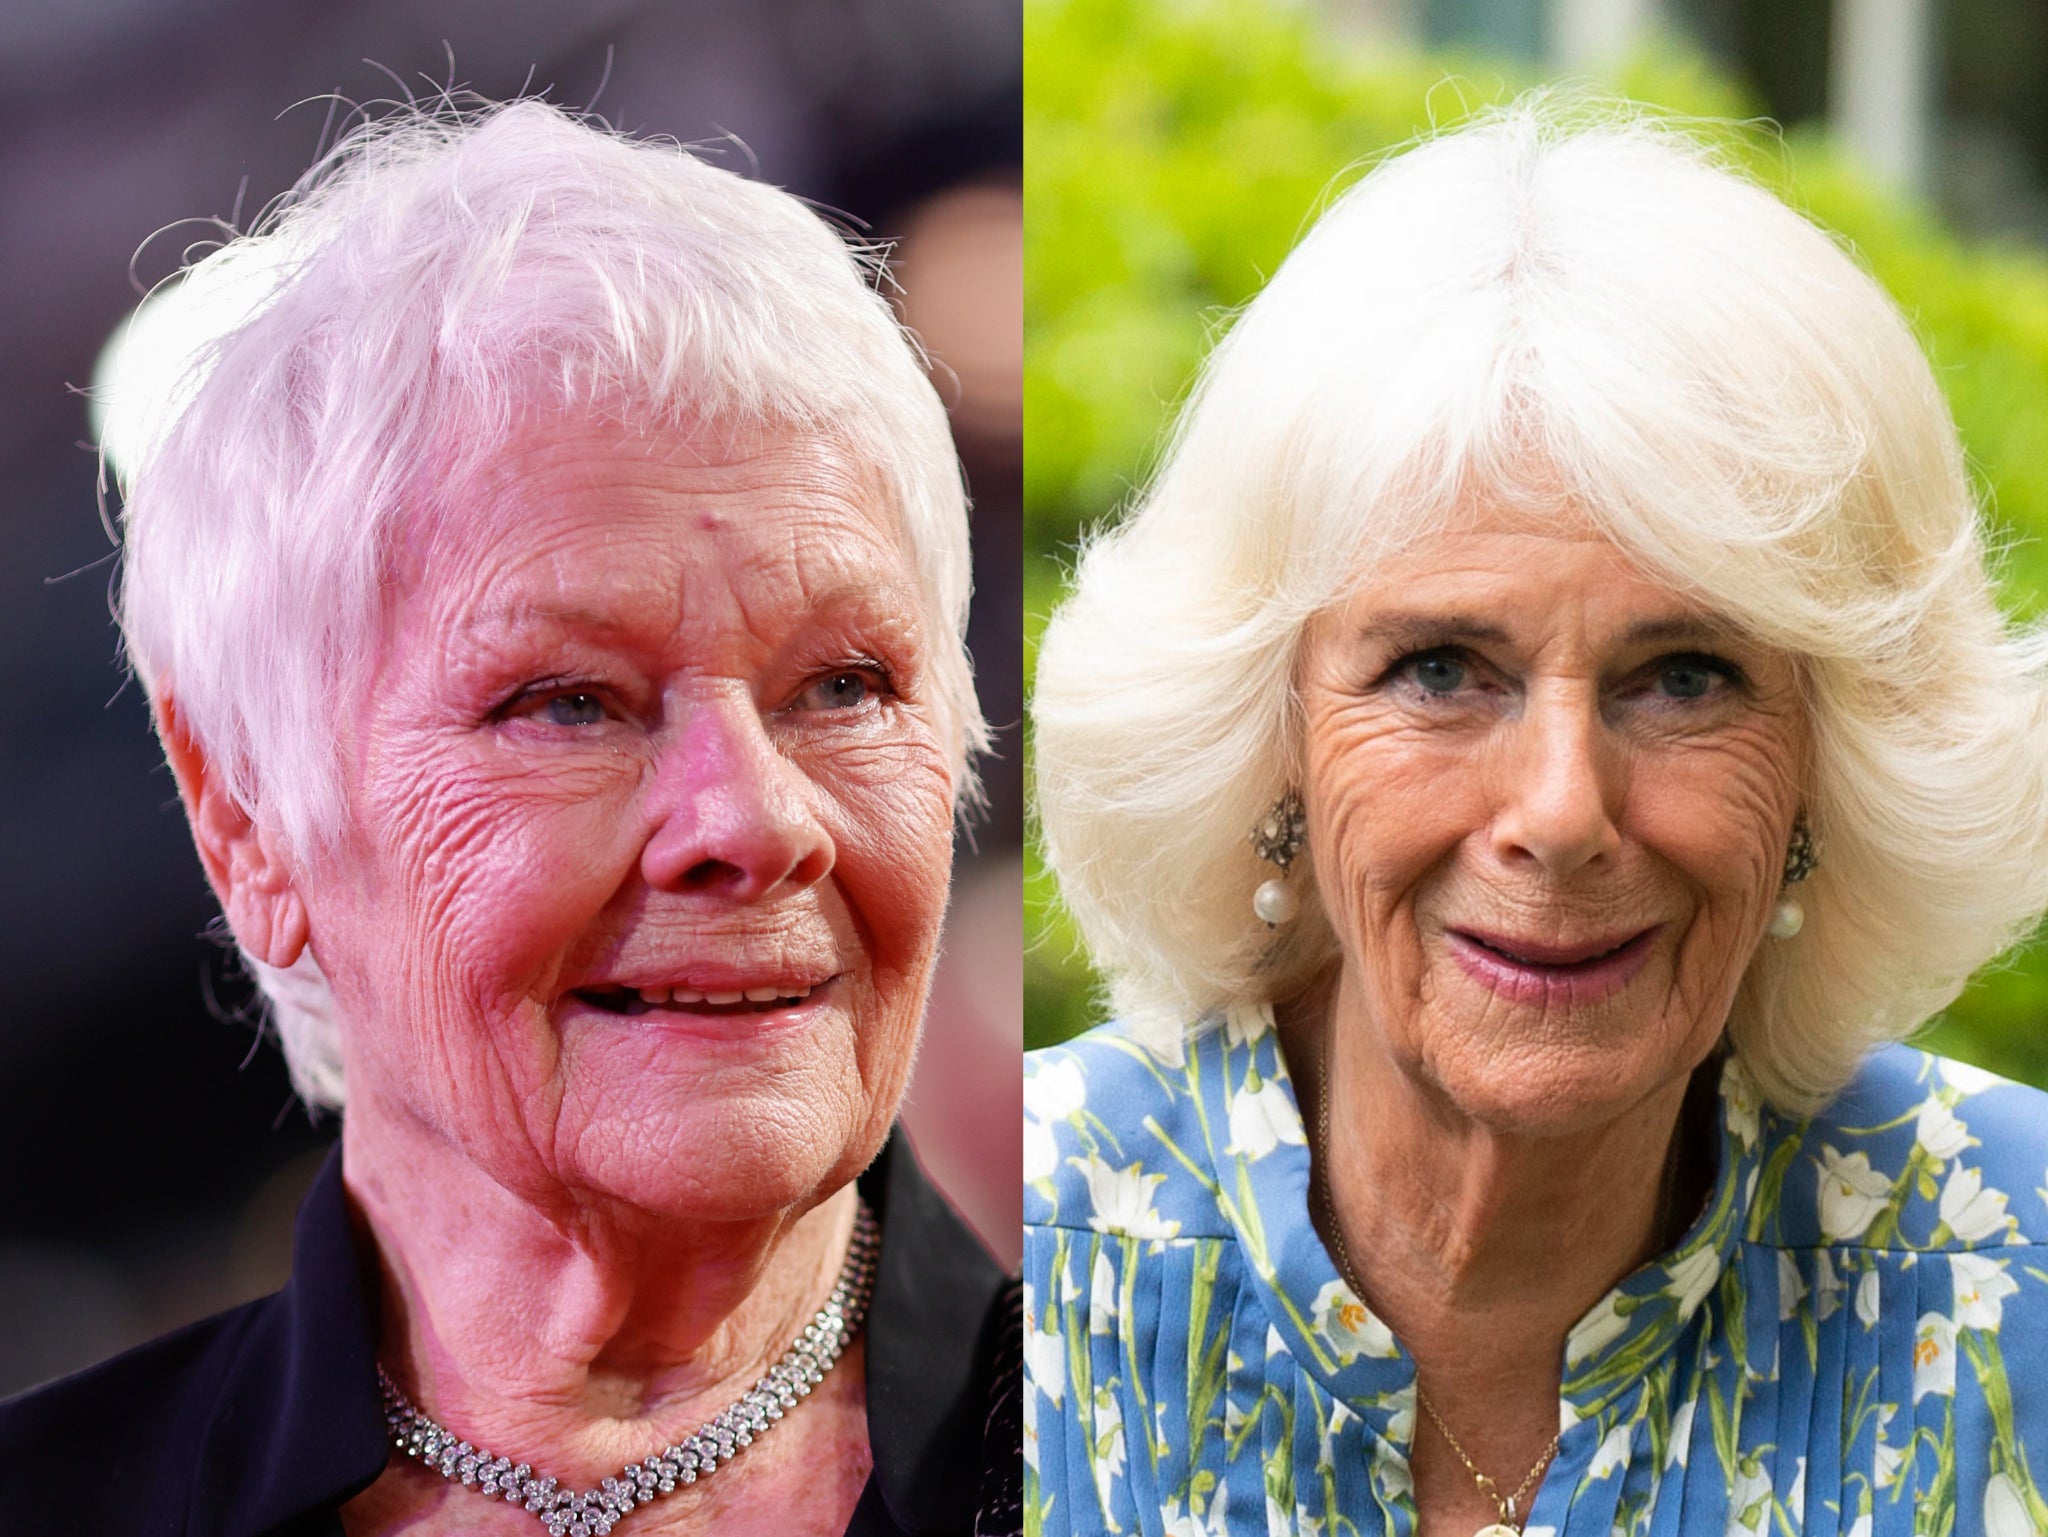 Dame Judi Dench and the Queen Consort, Camilla Parker Bowles.